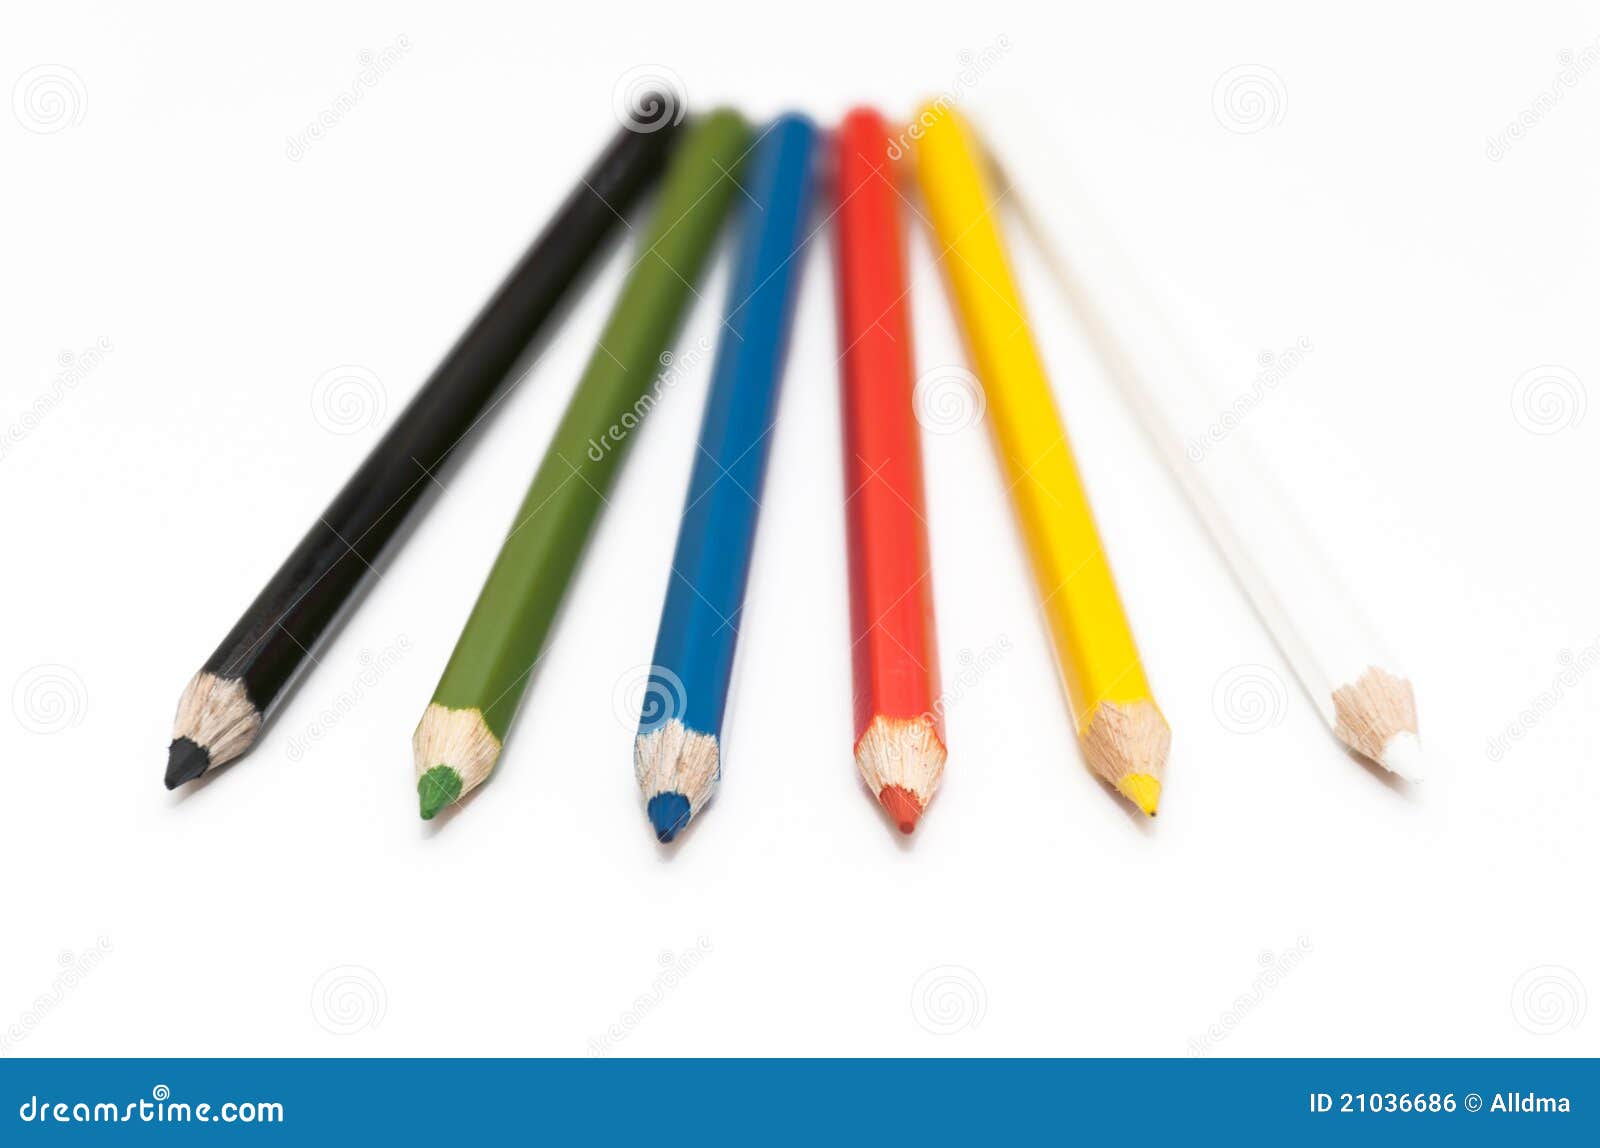 Number of colored pencils stock photo. Image of macro - 21036686